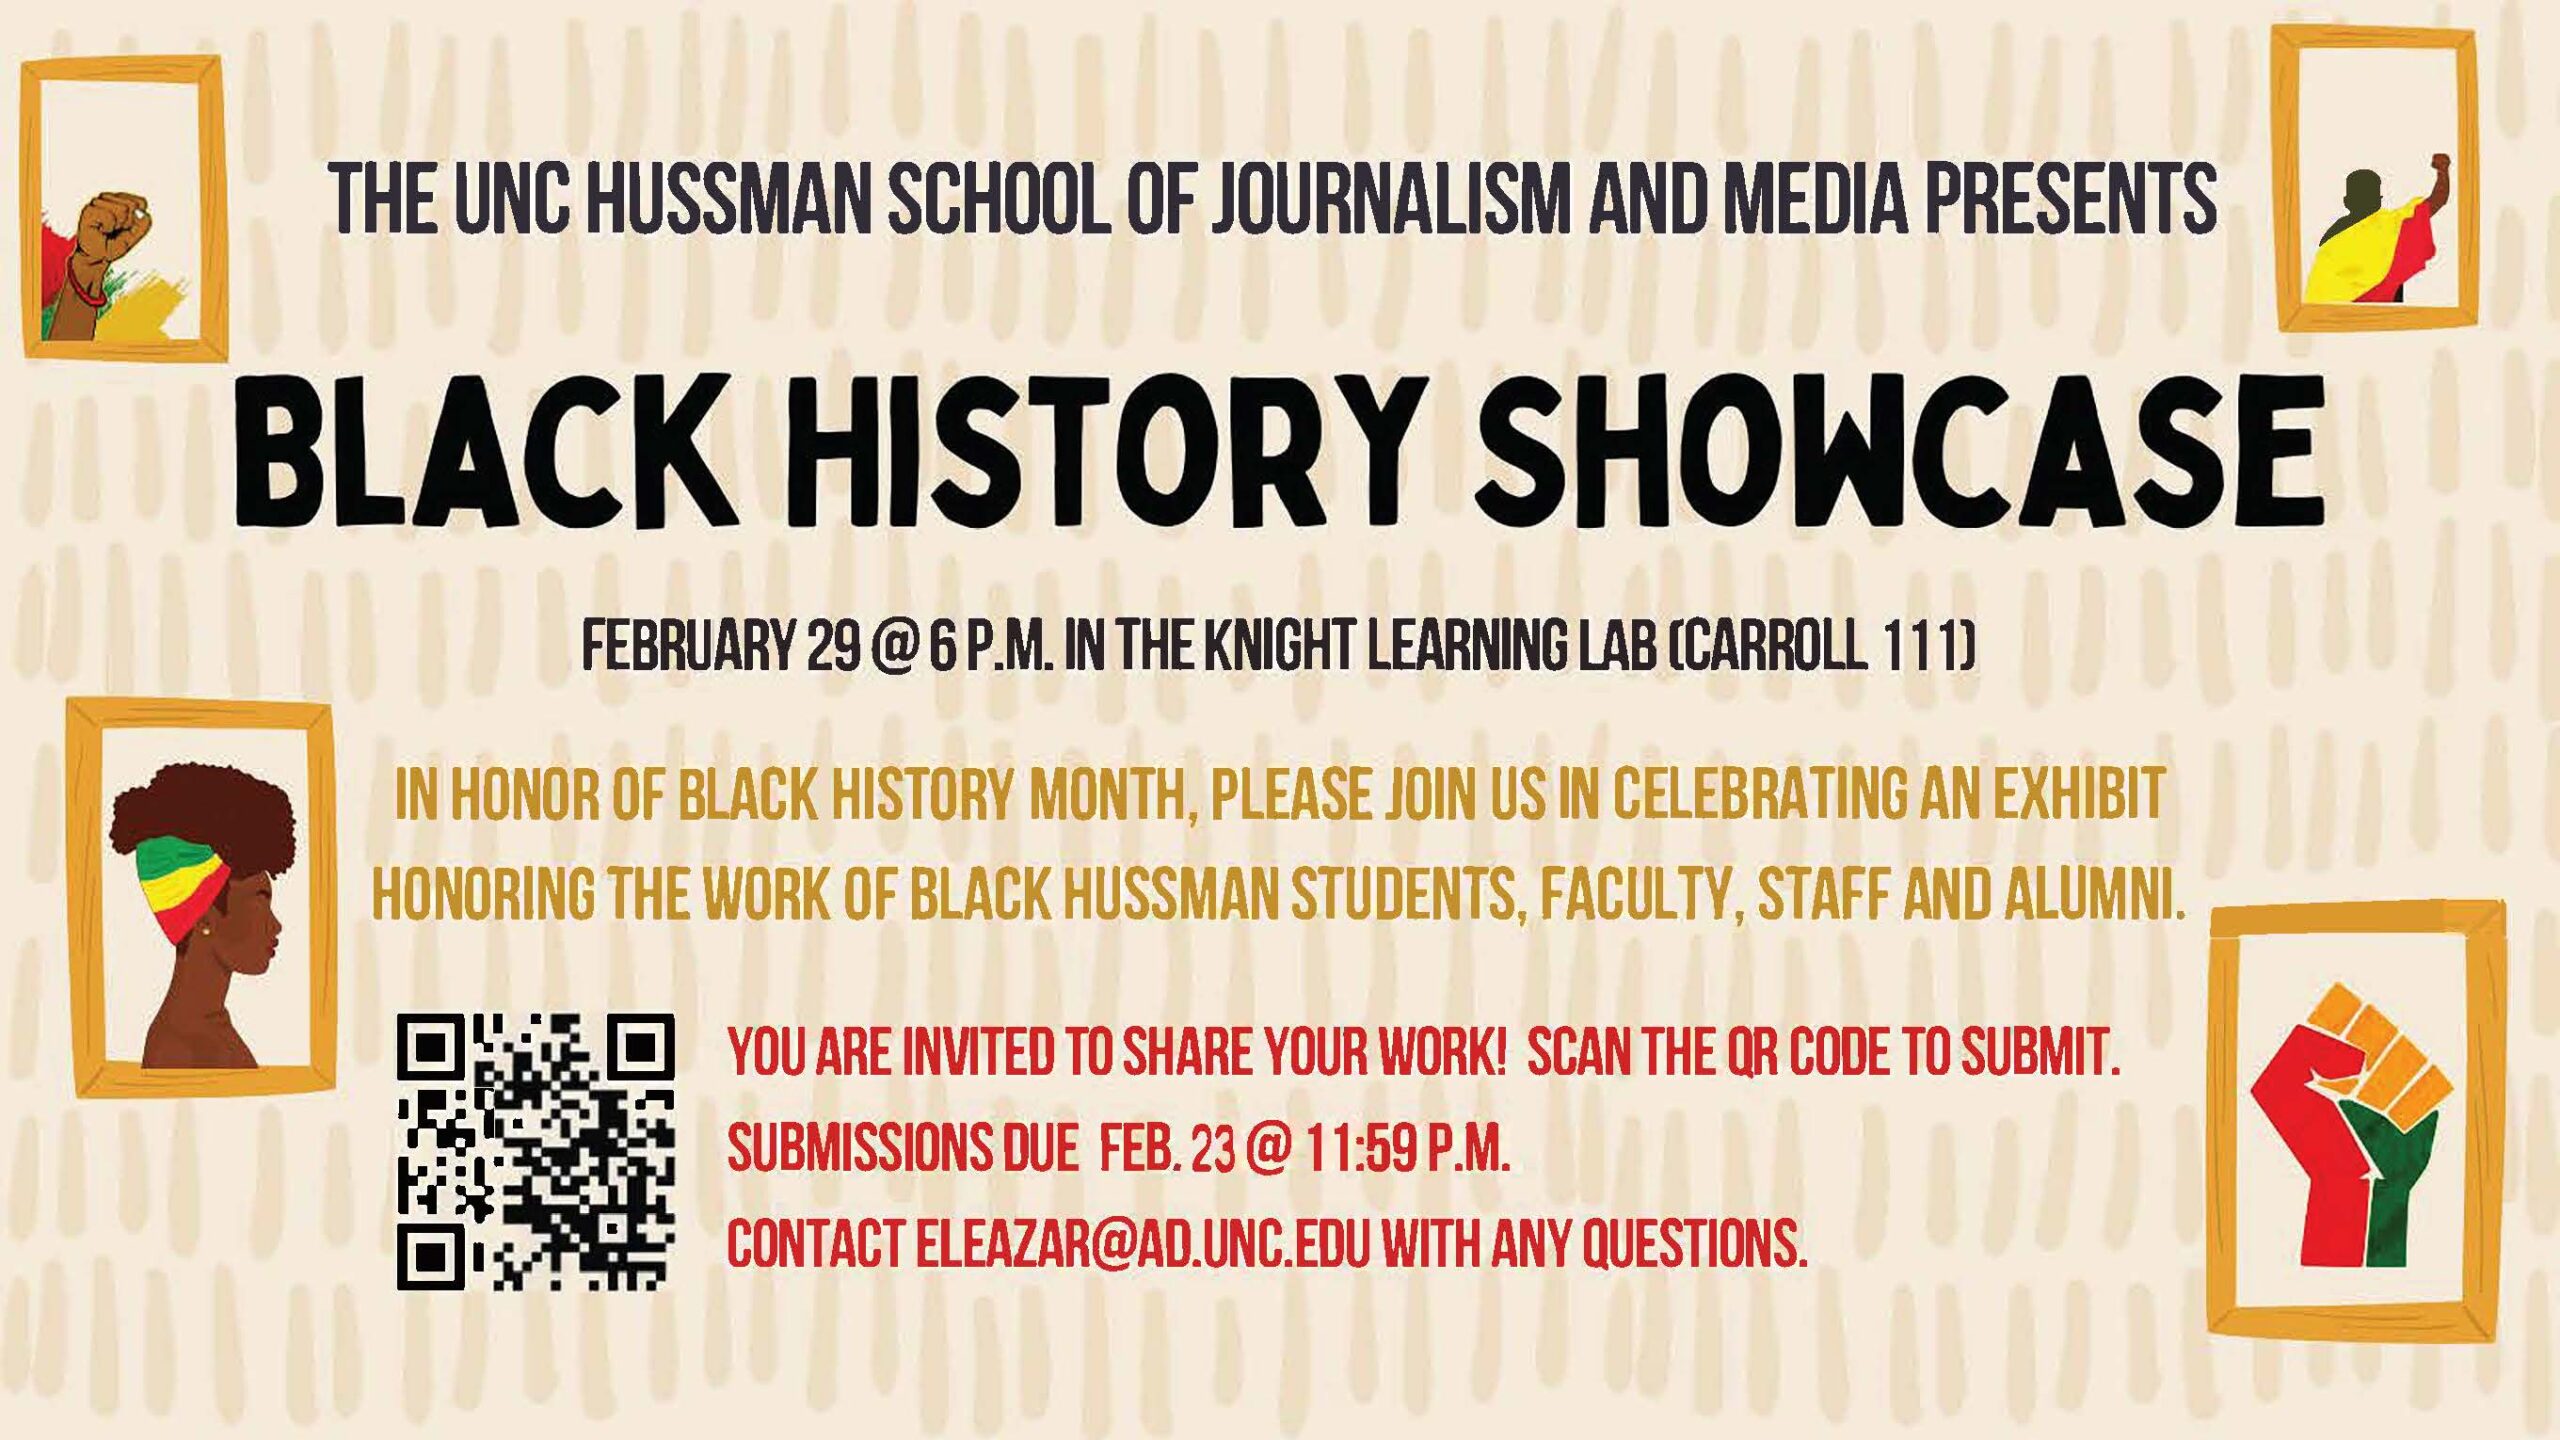 Flyer for Black History Showcase on February 29 at 6 P.M. in the Knight Learning Lab/Carroll 111